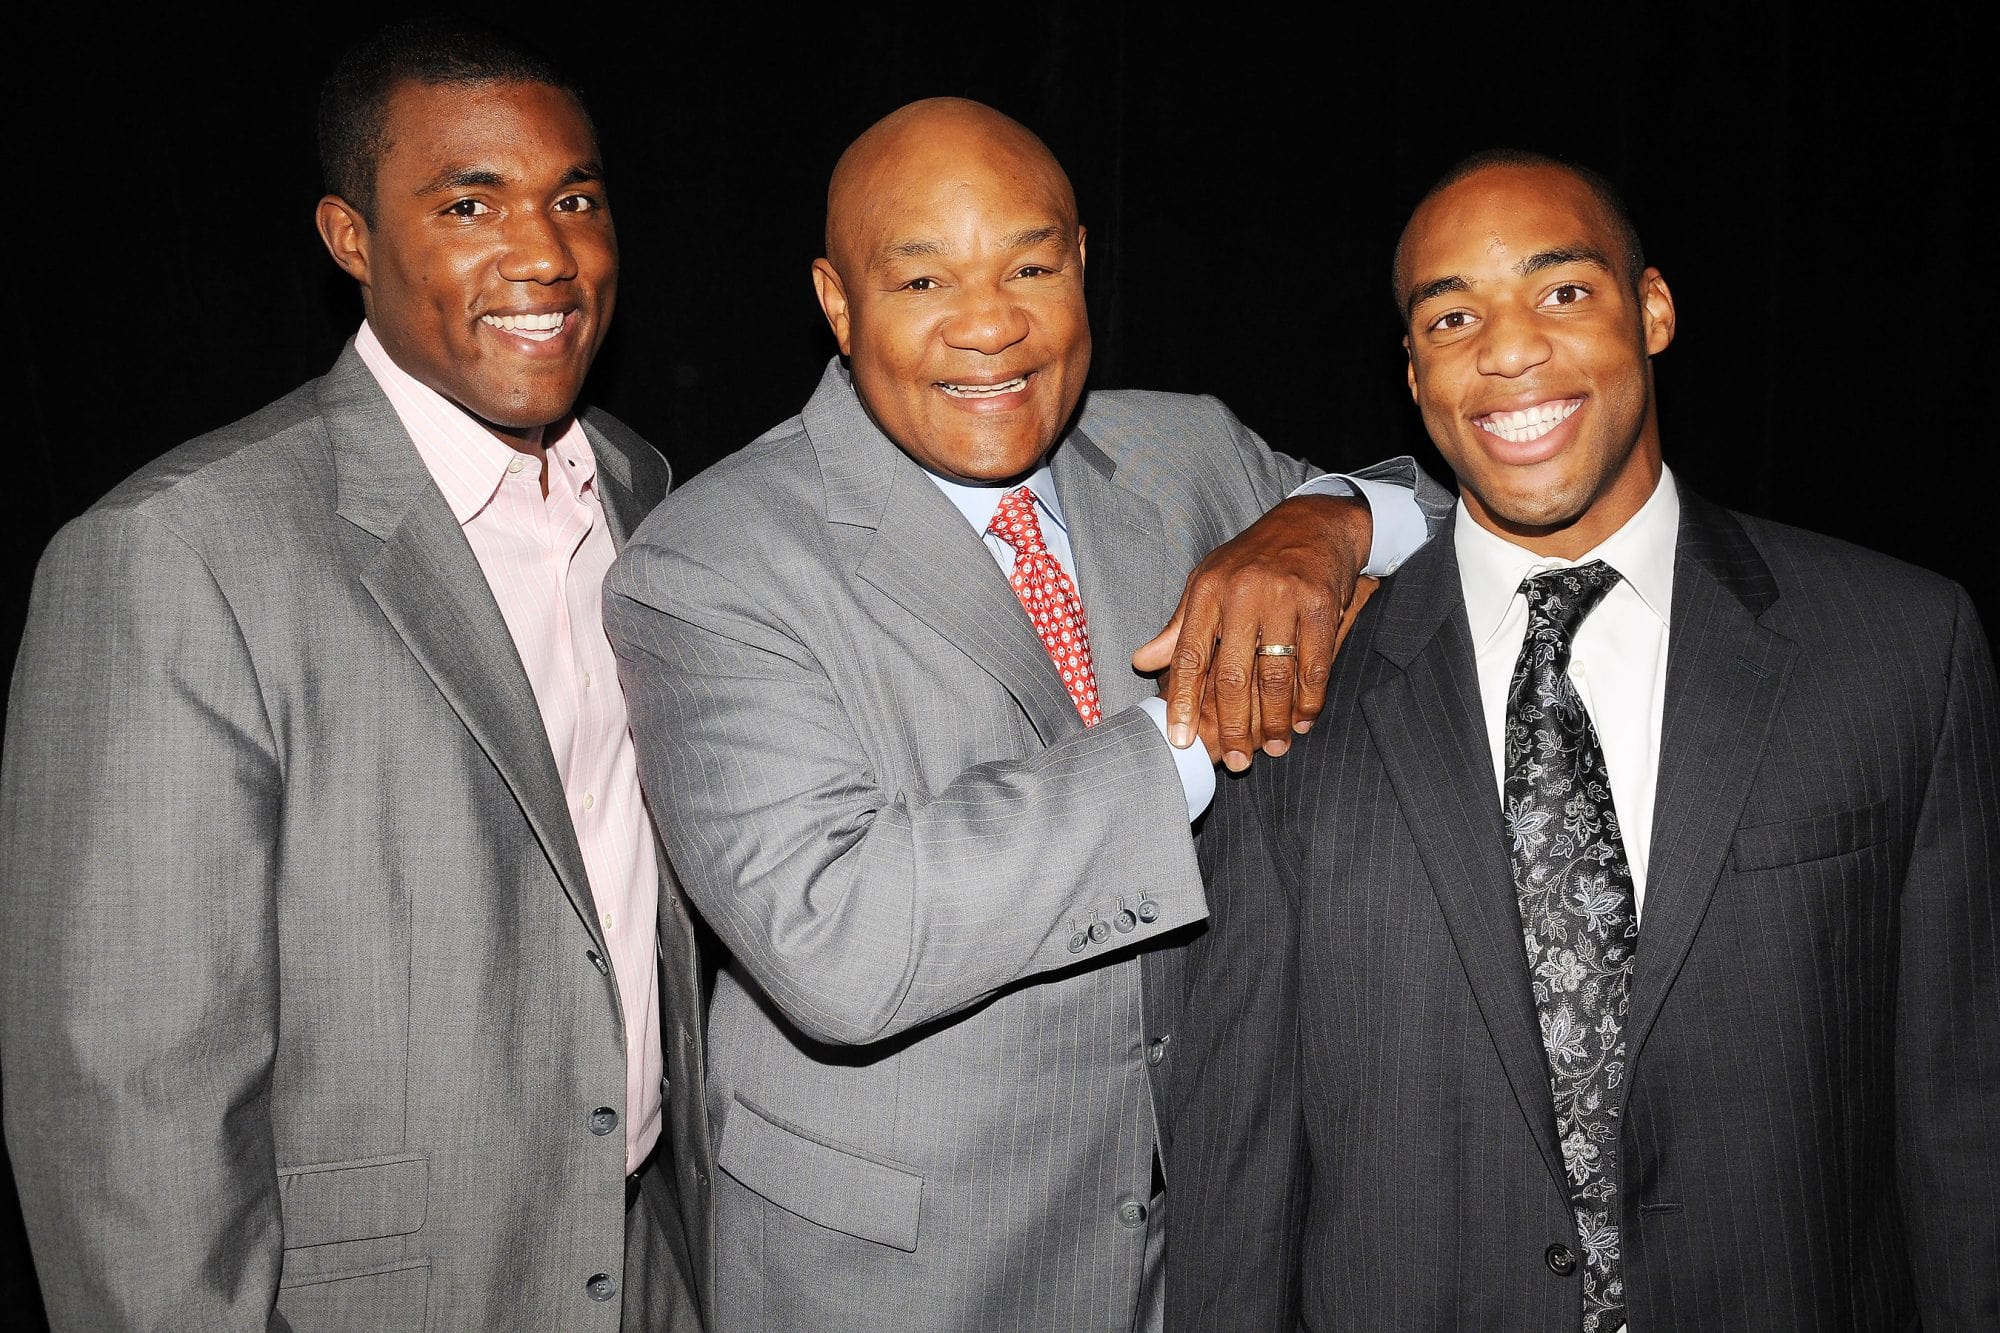 George Foreman with his sons George Foreman JR. and George Foreman IV in a suit pant